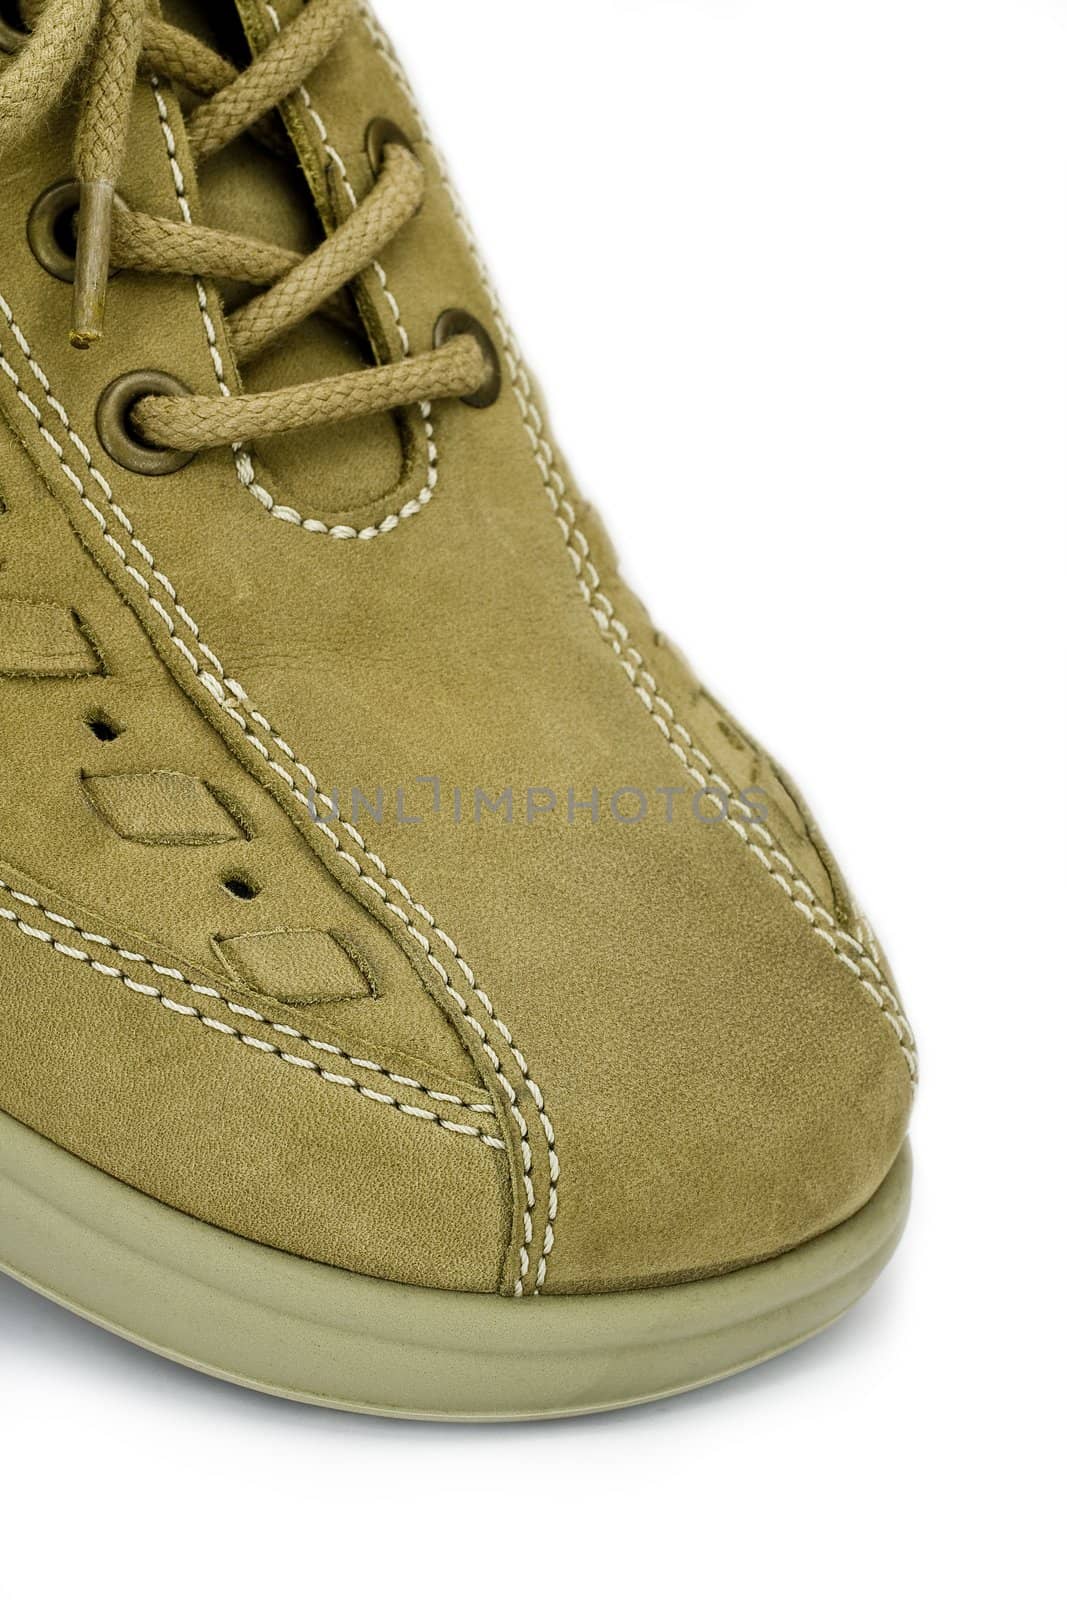 front of brown leather shoe in close up shot on white background